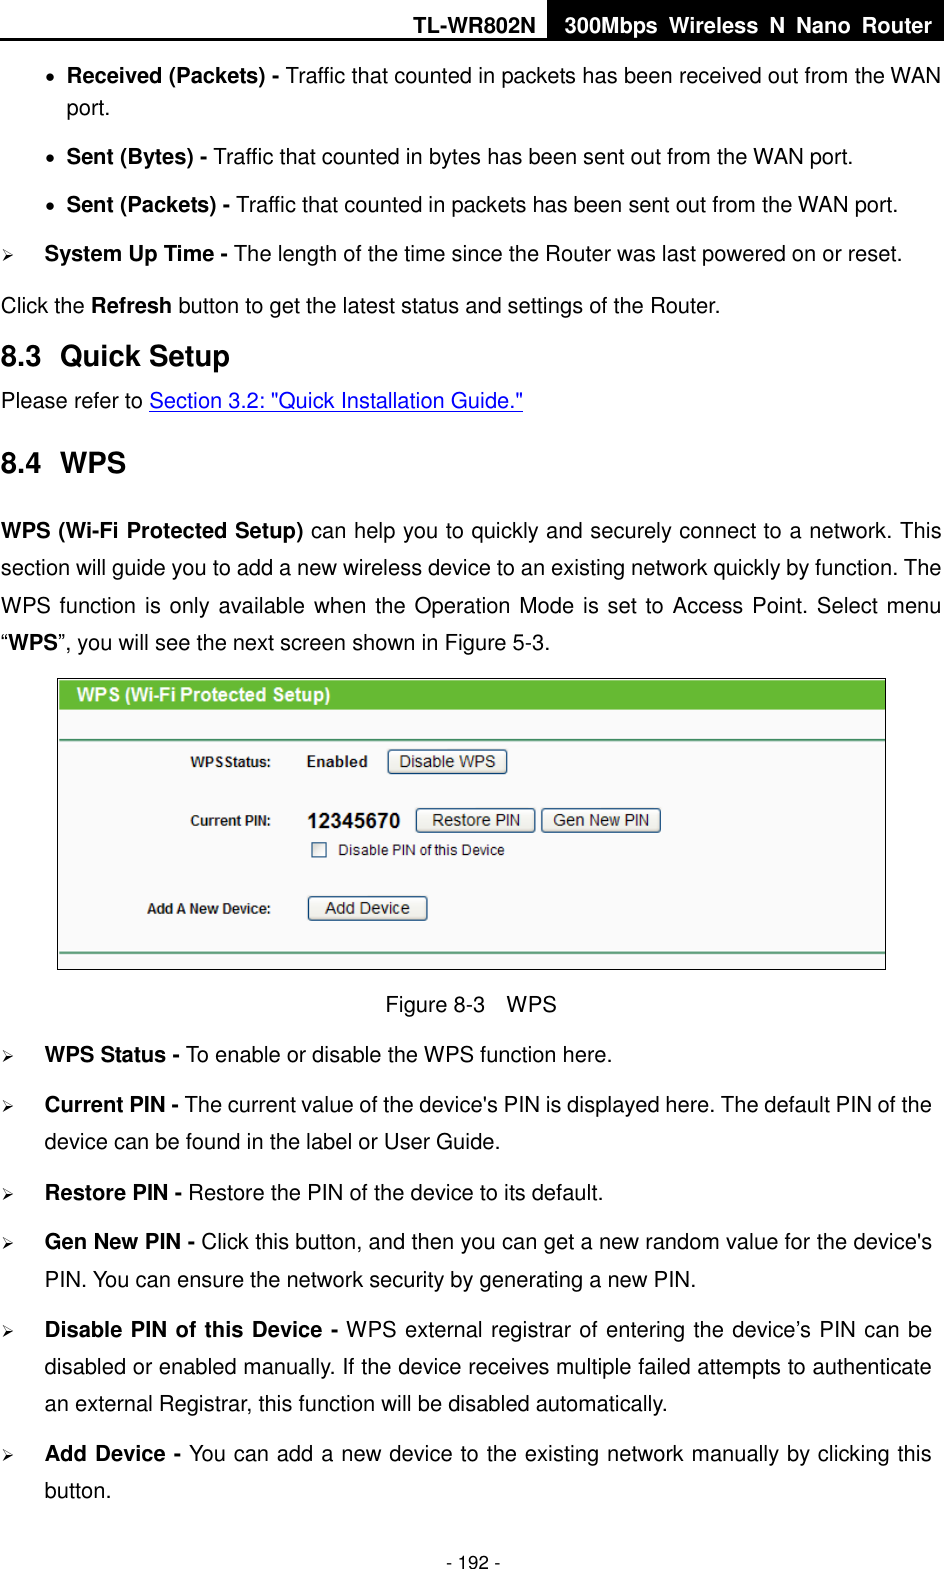 TL-WR802N 300Mbps  Wireless  N  Nano  Router  - 192 -  Received (Packets) - Traffic that counted in packets has been received out from the WAN port.  Sent (Bytes) - Traffic that counted in bytes has been sent out from the WAN port.  Sent (Packets) - Traffic that counted in packets has been sent out from the WAN port.  System Up Time - The length of the time since the Router was last powered on or reset. Click the Refresh button to get the latest status and settings of the Router. 8.3  Quick Setup Please refer to Section 3.2: &quot;Quick Installation Guide.&quot; 8.4  WPS WPS (Wi-Fi Protected Setup) can help you to quickly and securely connect to a network. This section will guide you to add a new wireless device to an existing network quickly by function. The WPS function is only available when the Operation Mode is set to Access Point. Select menu “WPS”, you will see the next screen shown in Figure 5-3.    Figure 8-3    WPS  WPS Status - To enable or disable the WPS function here.    Current PIN - The current value of the device&apos;s PIN is displayed here. The default PIN of the device can be found in the label or User Guide.    Restore PIN - Restore the PIN of the device to its default.    Gen New PIN - Click this button, and then you can get a new random value for the device&apos;s PIN. You can ensure the network security by generating a new PIN.    Disable PIN of this Device - WPS external registrar of entering the device’s PIN can be disabled or enabled manually. If the device receives multiple failed attempts to authenticate an external Registrar, this function will be disabled automatically.   Add Device - You can add a new device to the existing network manually by clicking this button.   